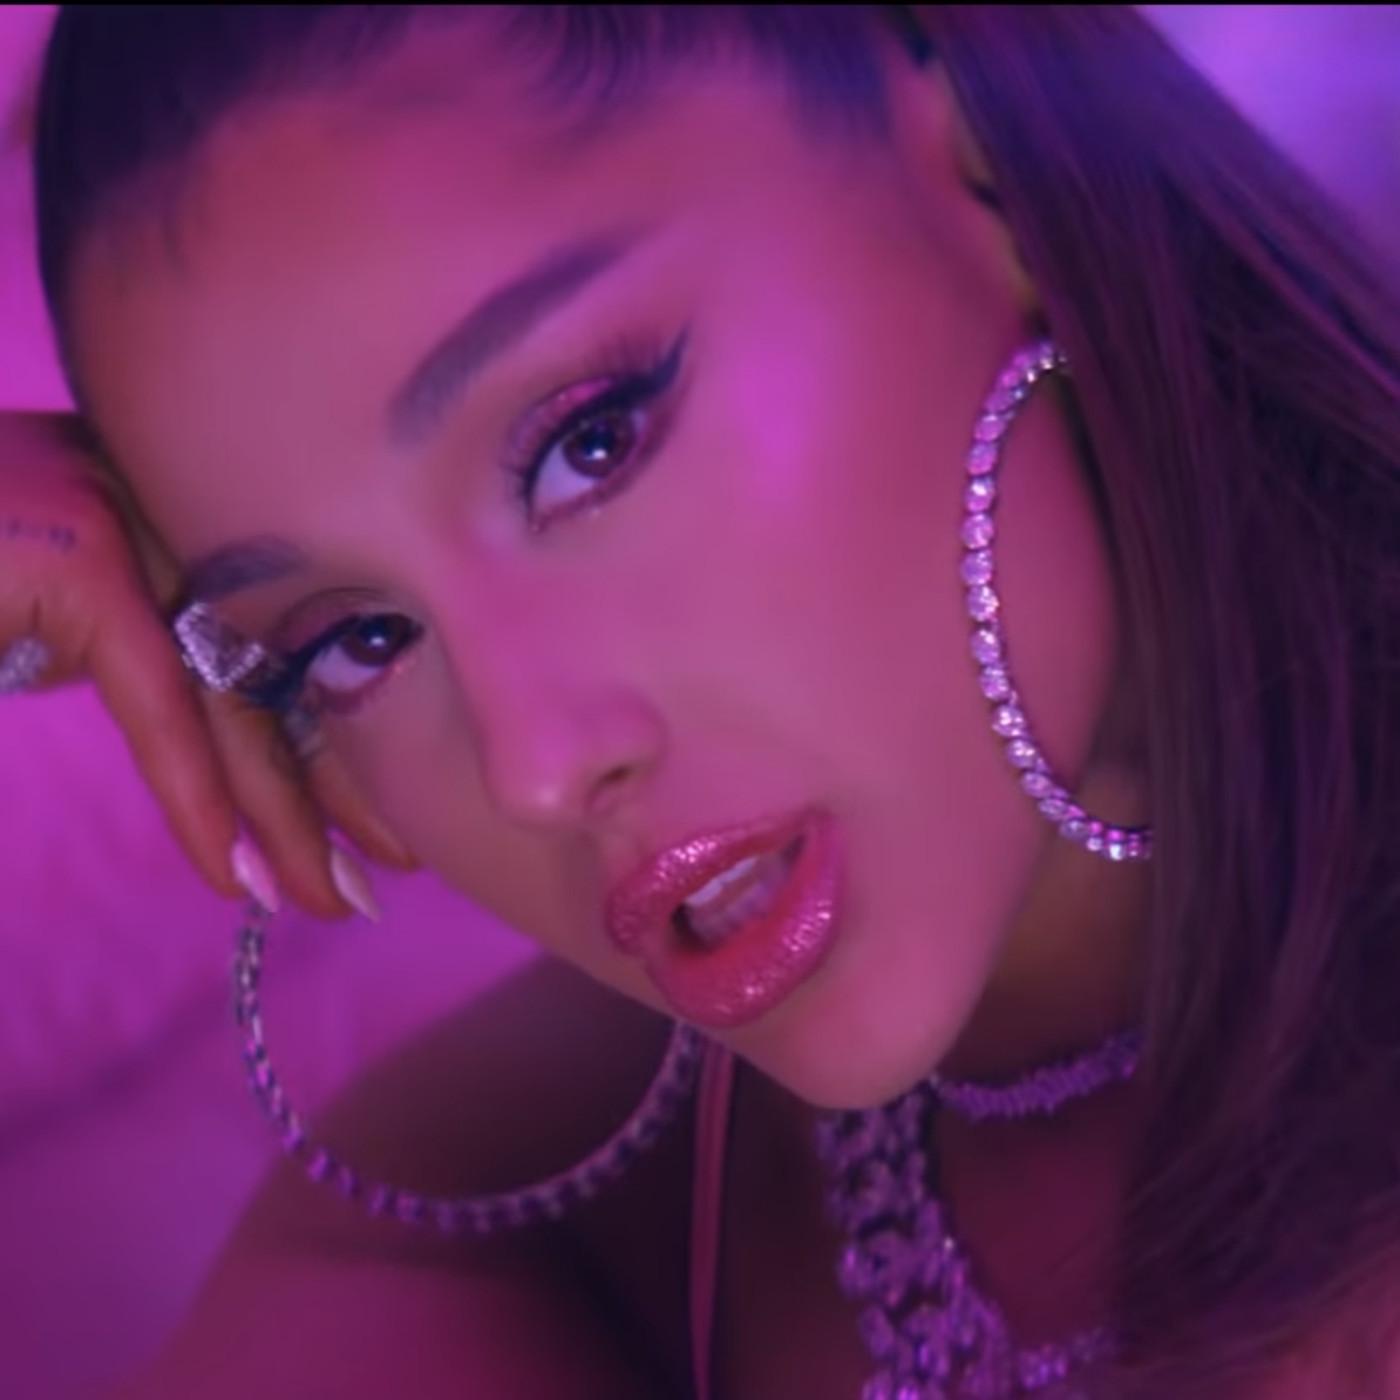 Ariana Grande's “7 Rings” music video is all about money